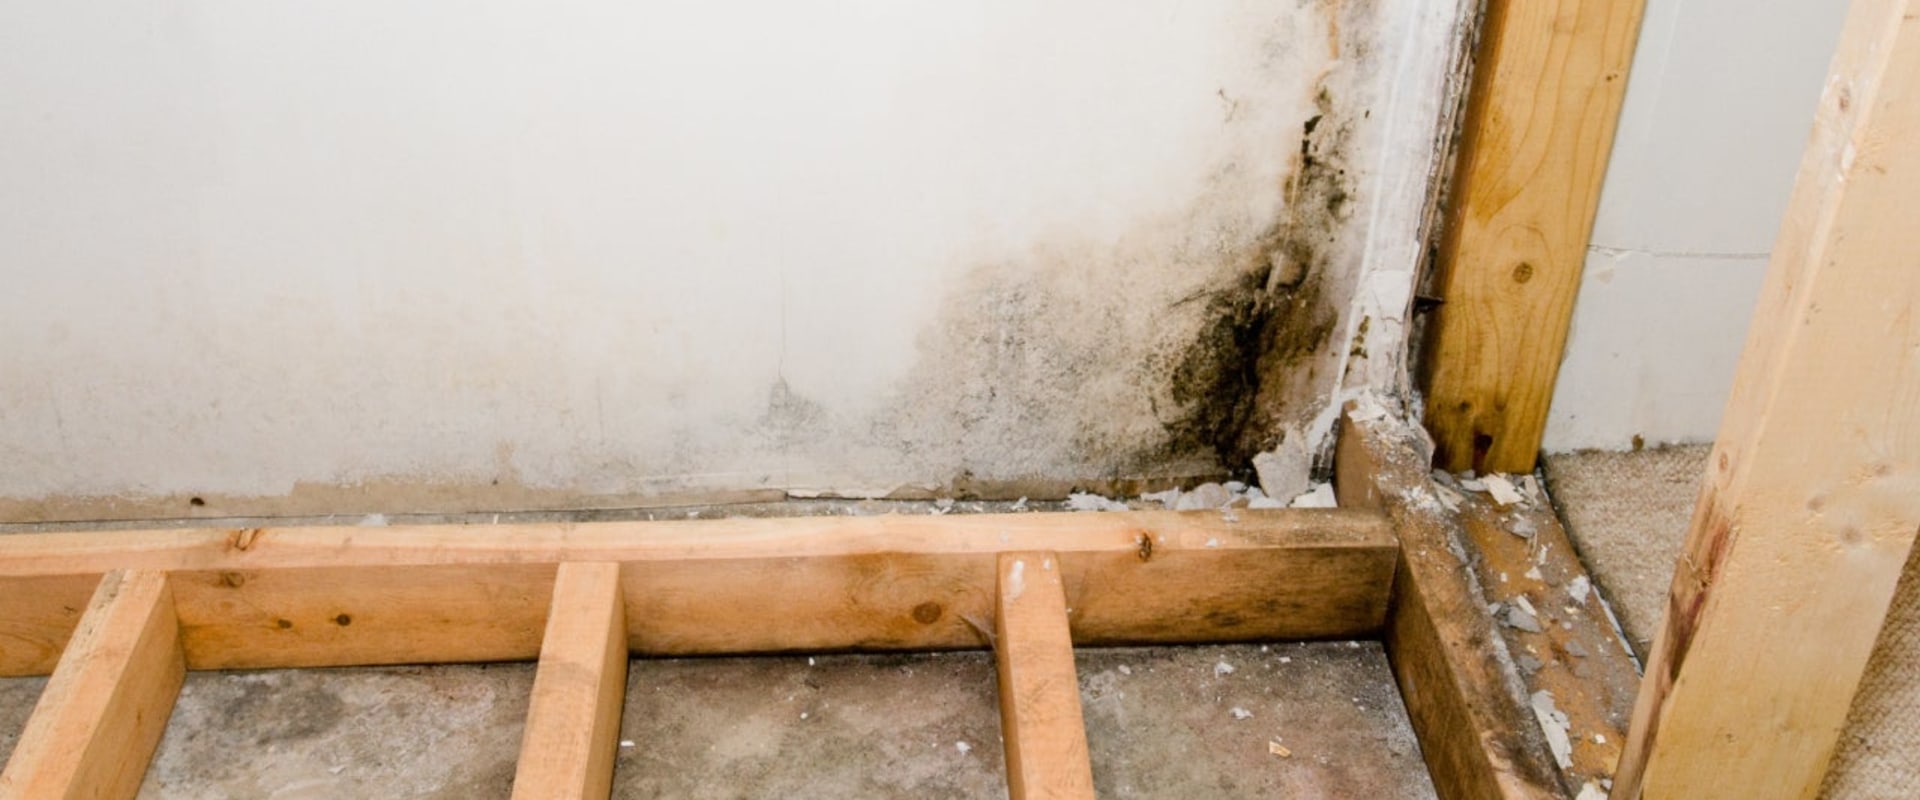 Can mold be claimed on homeowners insurance?